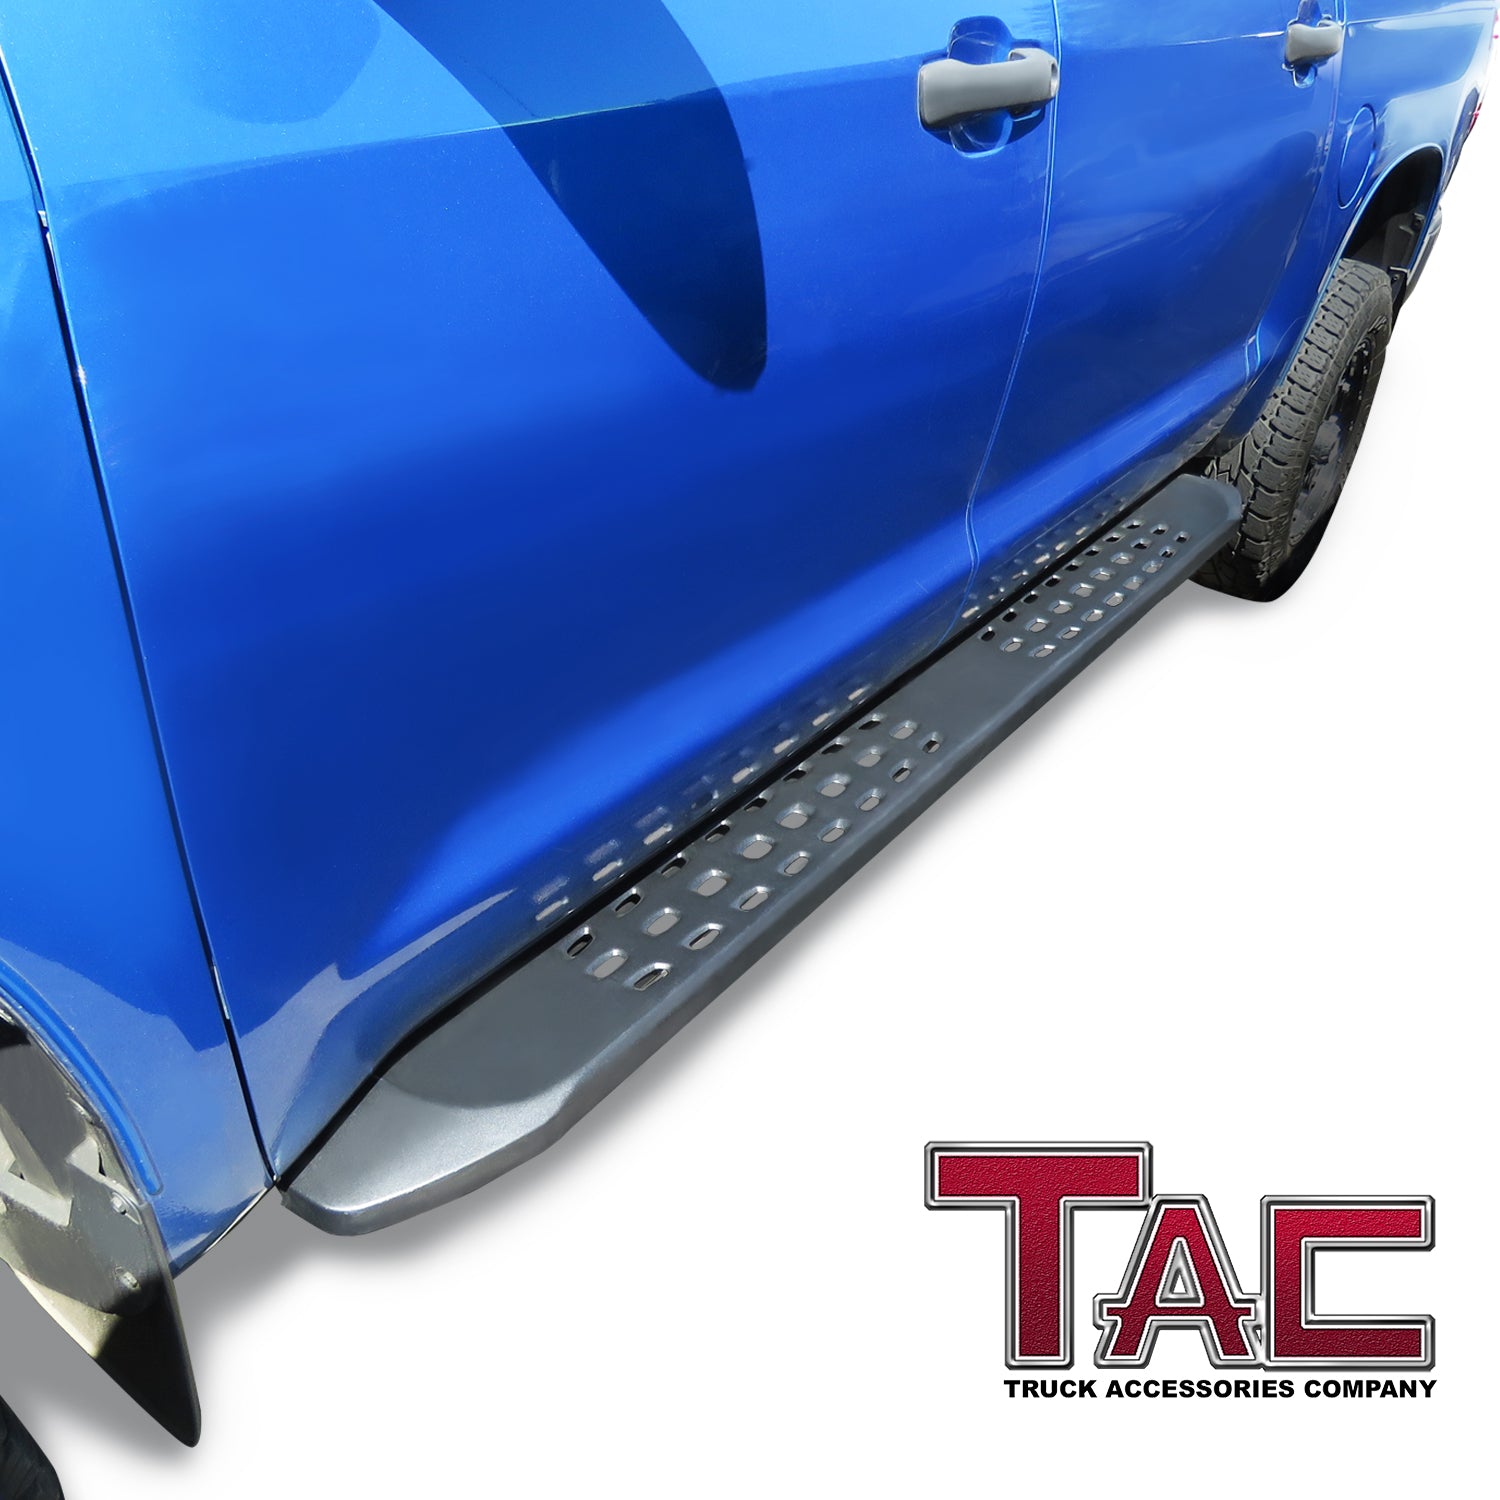 TAC Fine Texture Frigate Running Boards for 2007-2021 Toyota Tundra Crew Max Truck | Side Steps | Nerf Bars | Side Bars - 0